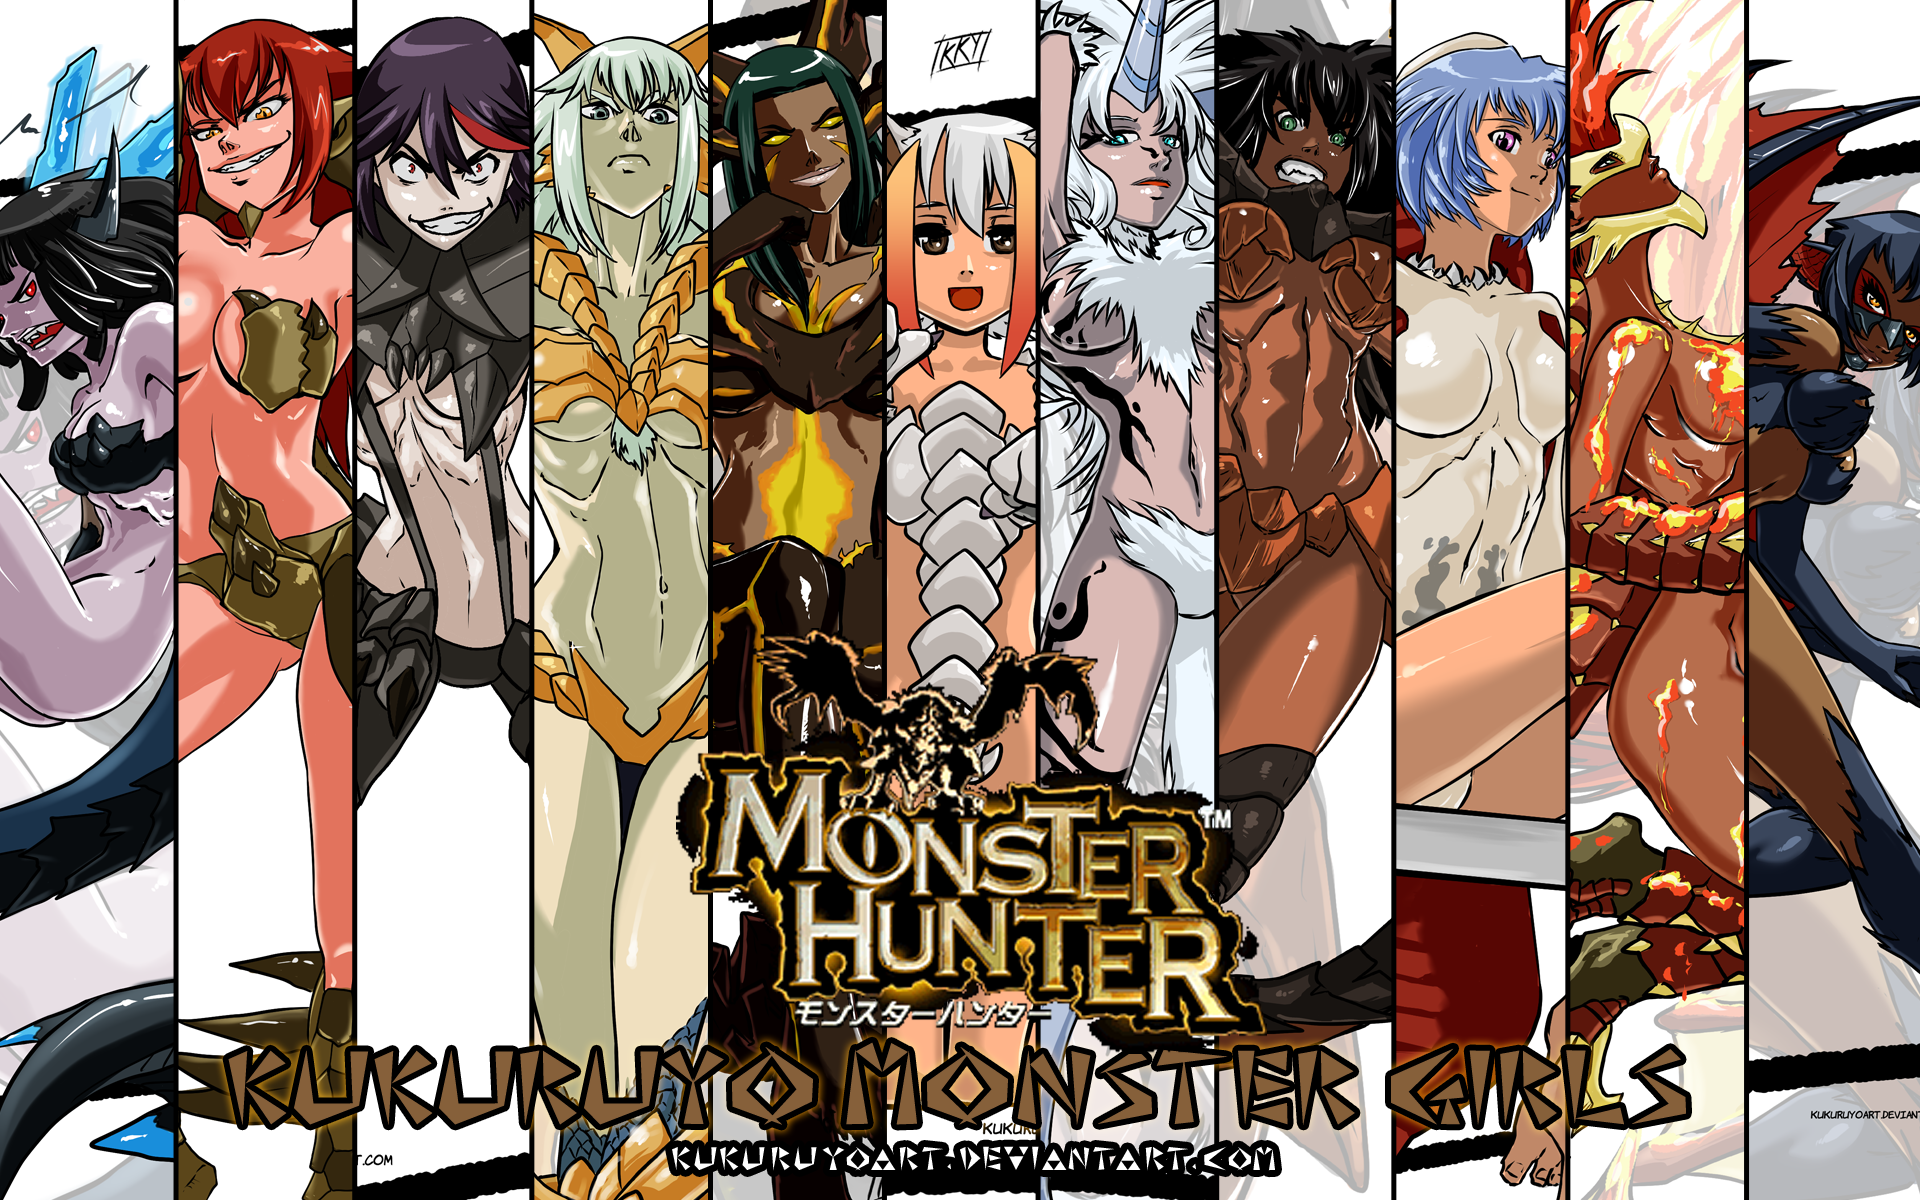 1920px x 1200px - Monster hunter 4 ultimate porn hentay image